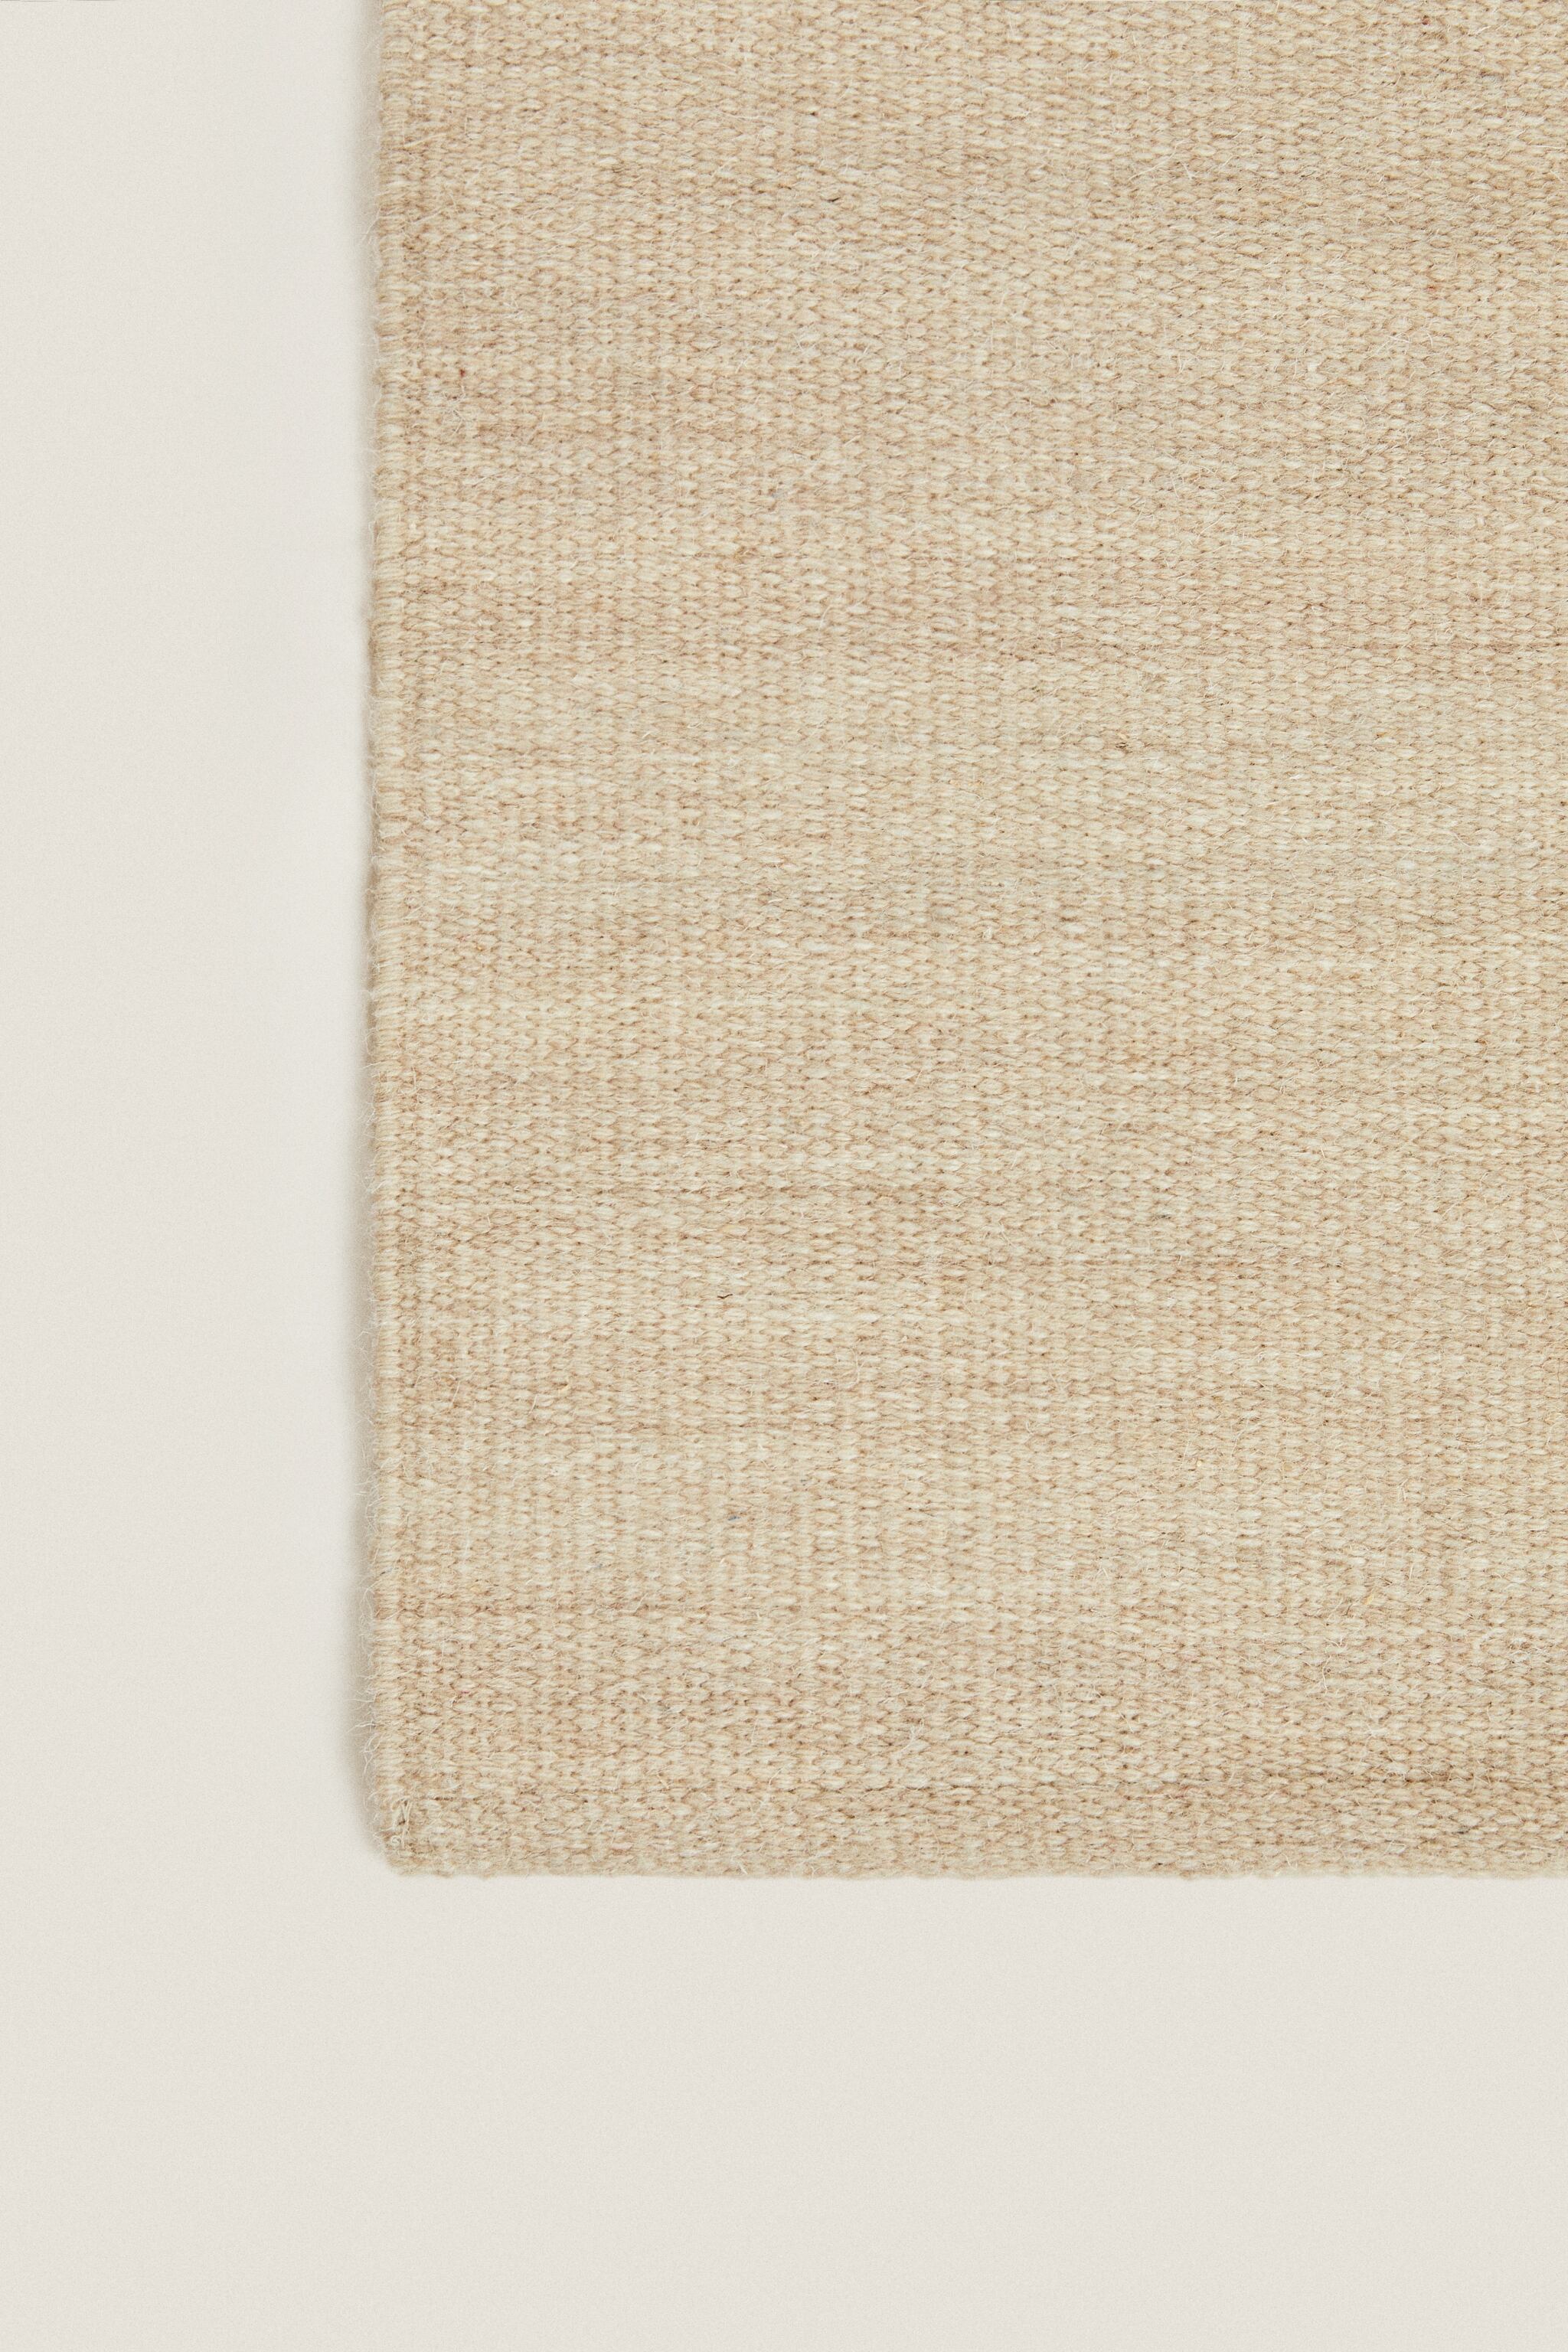 WOOL AND COTTON RUG